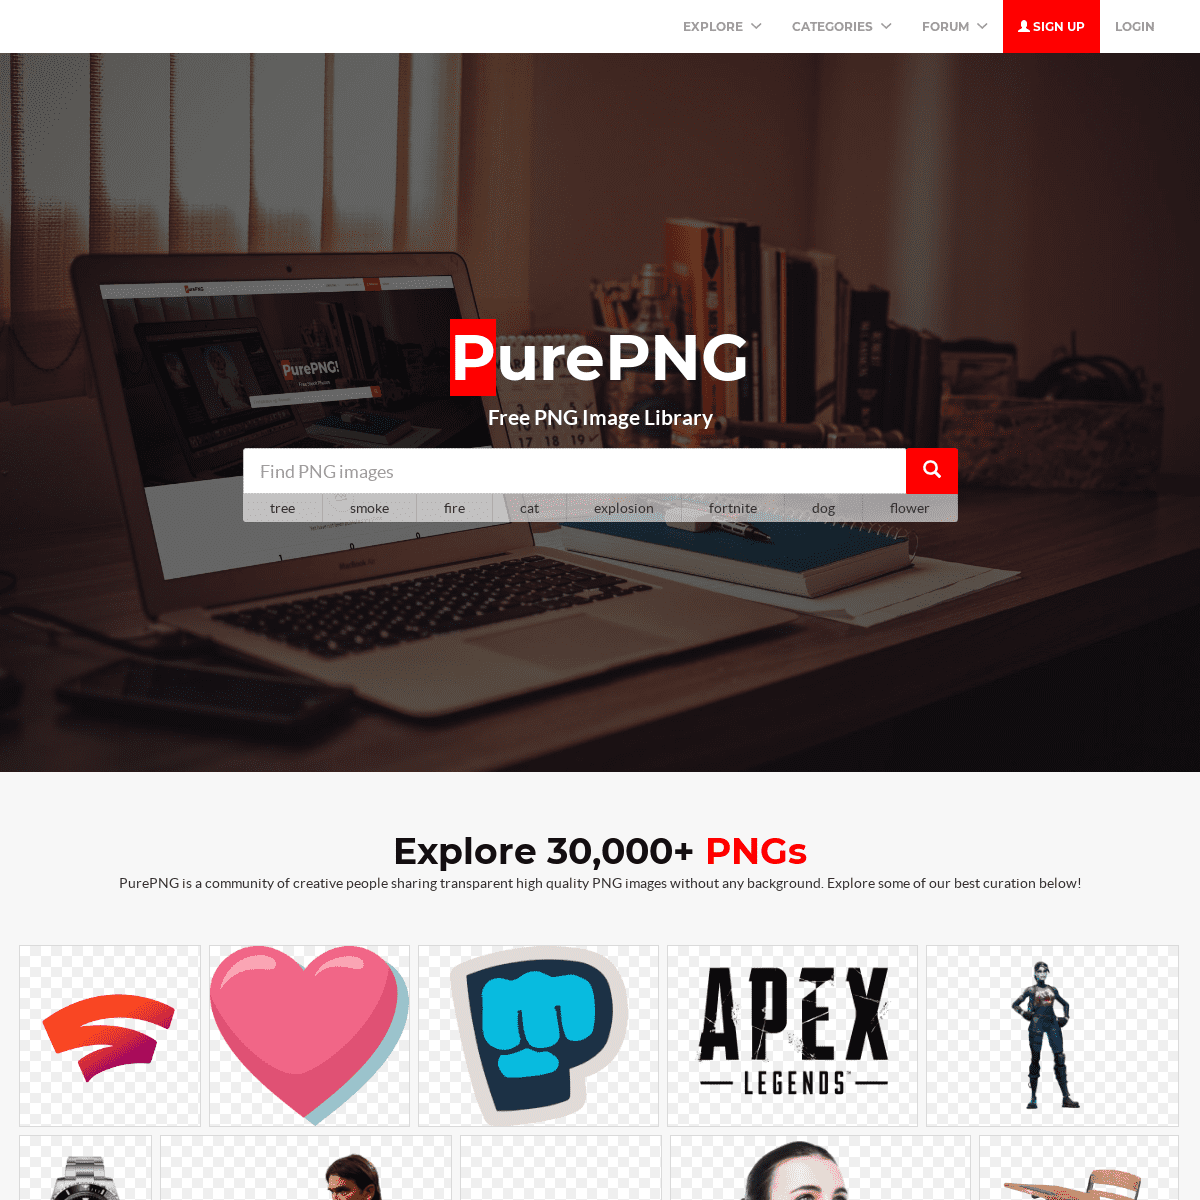  PurePNG | Free transparent CC0 PNG Image Library